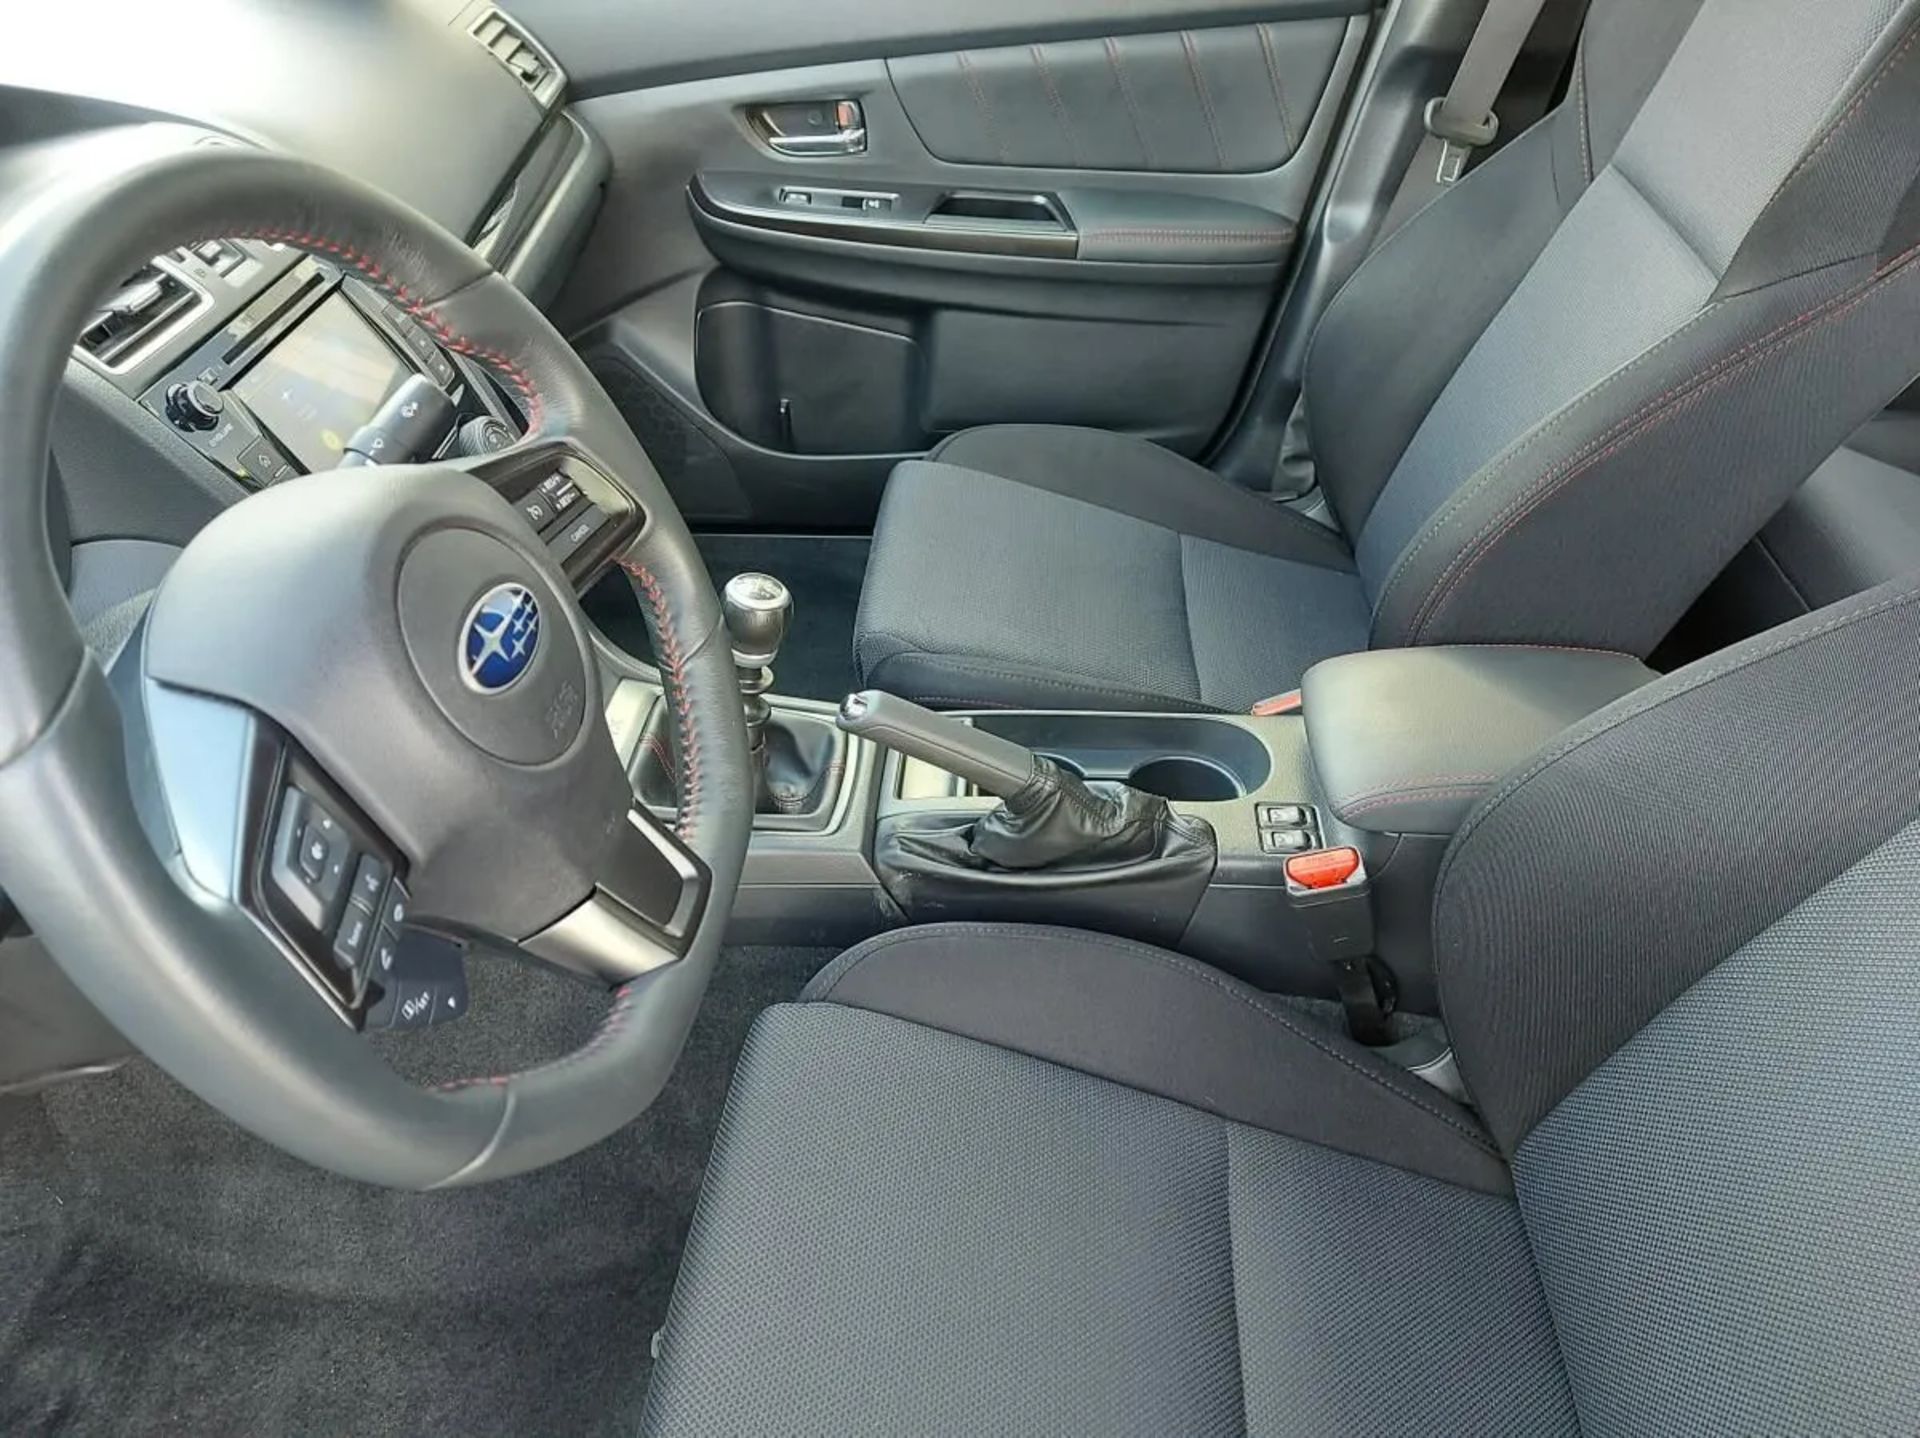 2021 SUBARU WRX 6 SPEED! ONE OWNER! NO MODS! CLEAN CARFAX! - Image 10 of 29